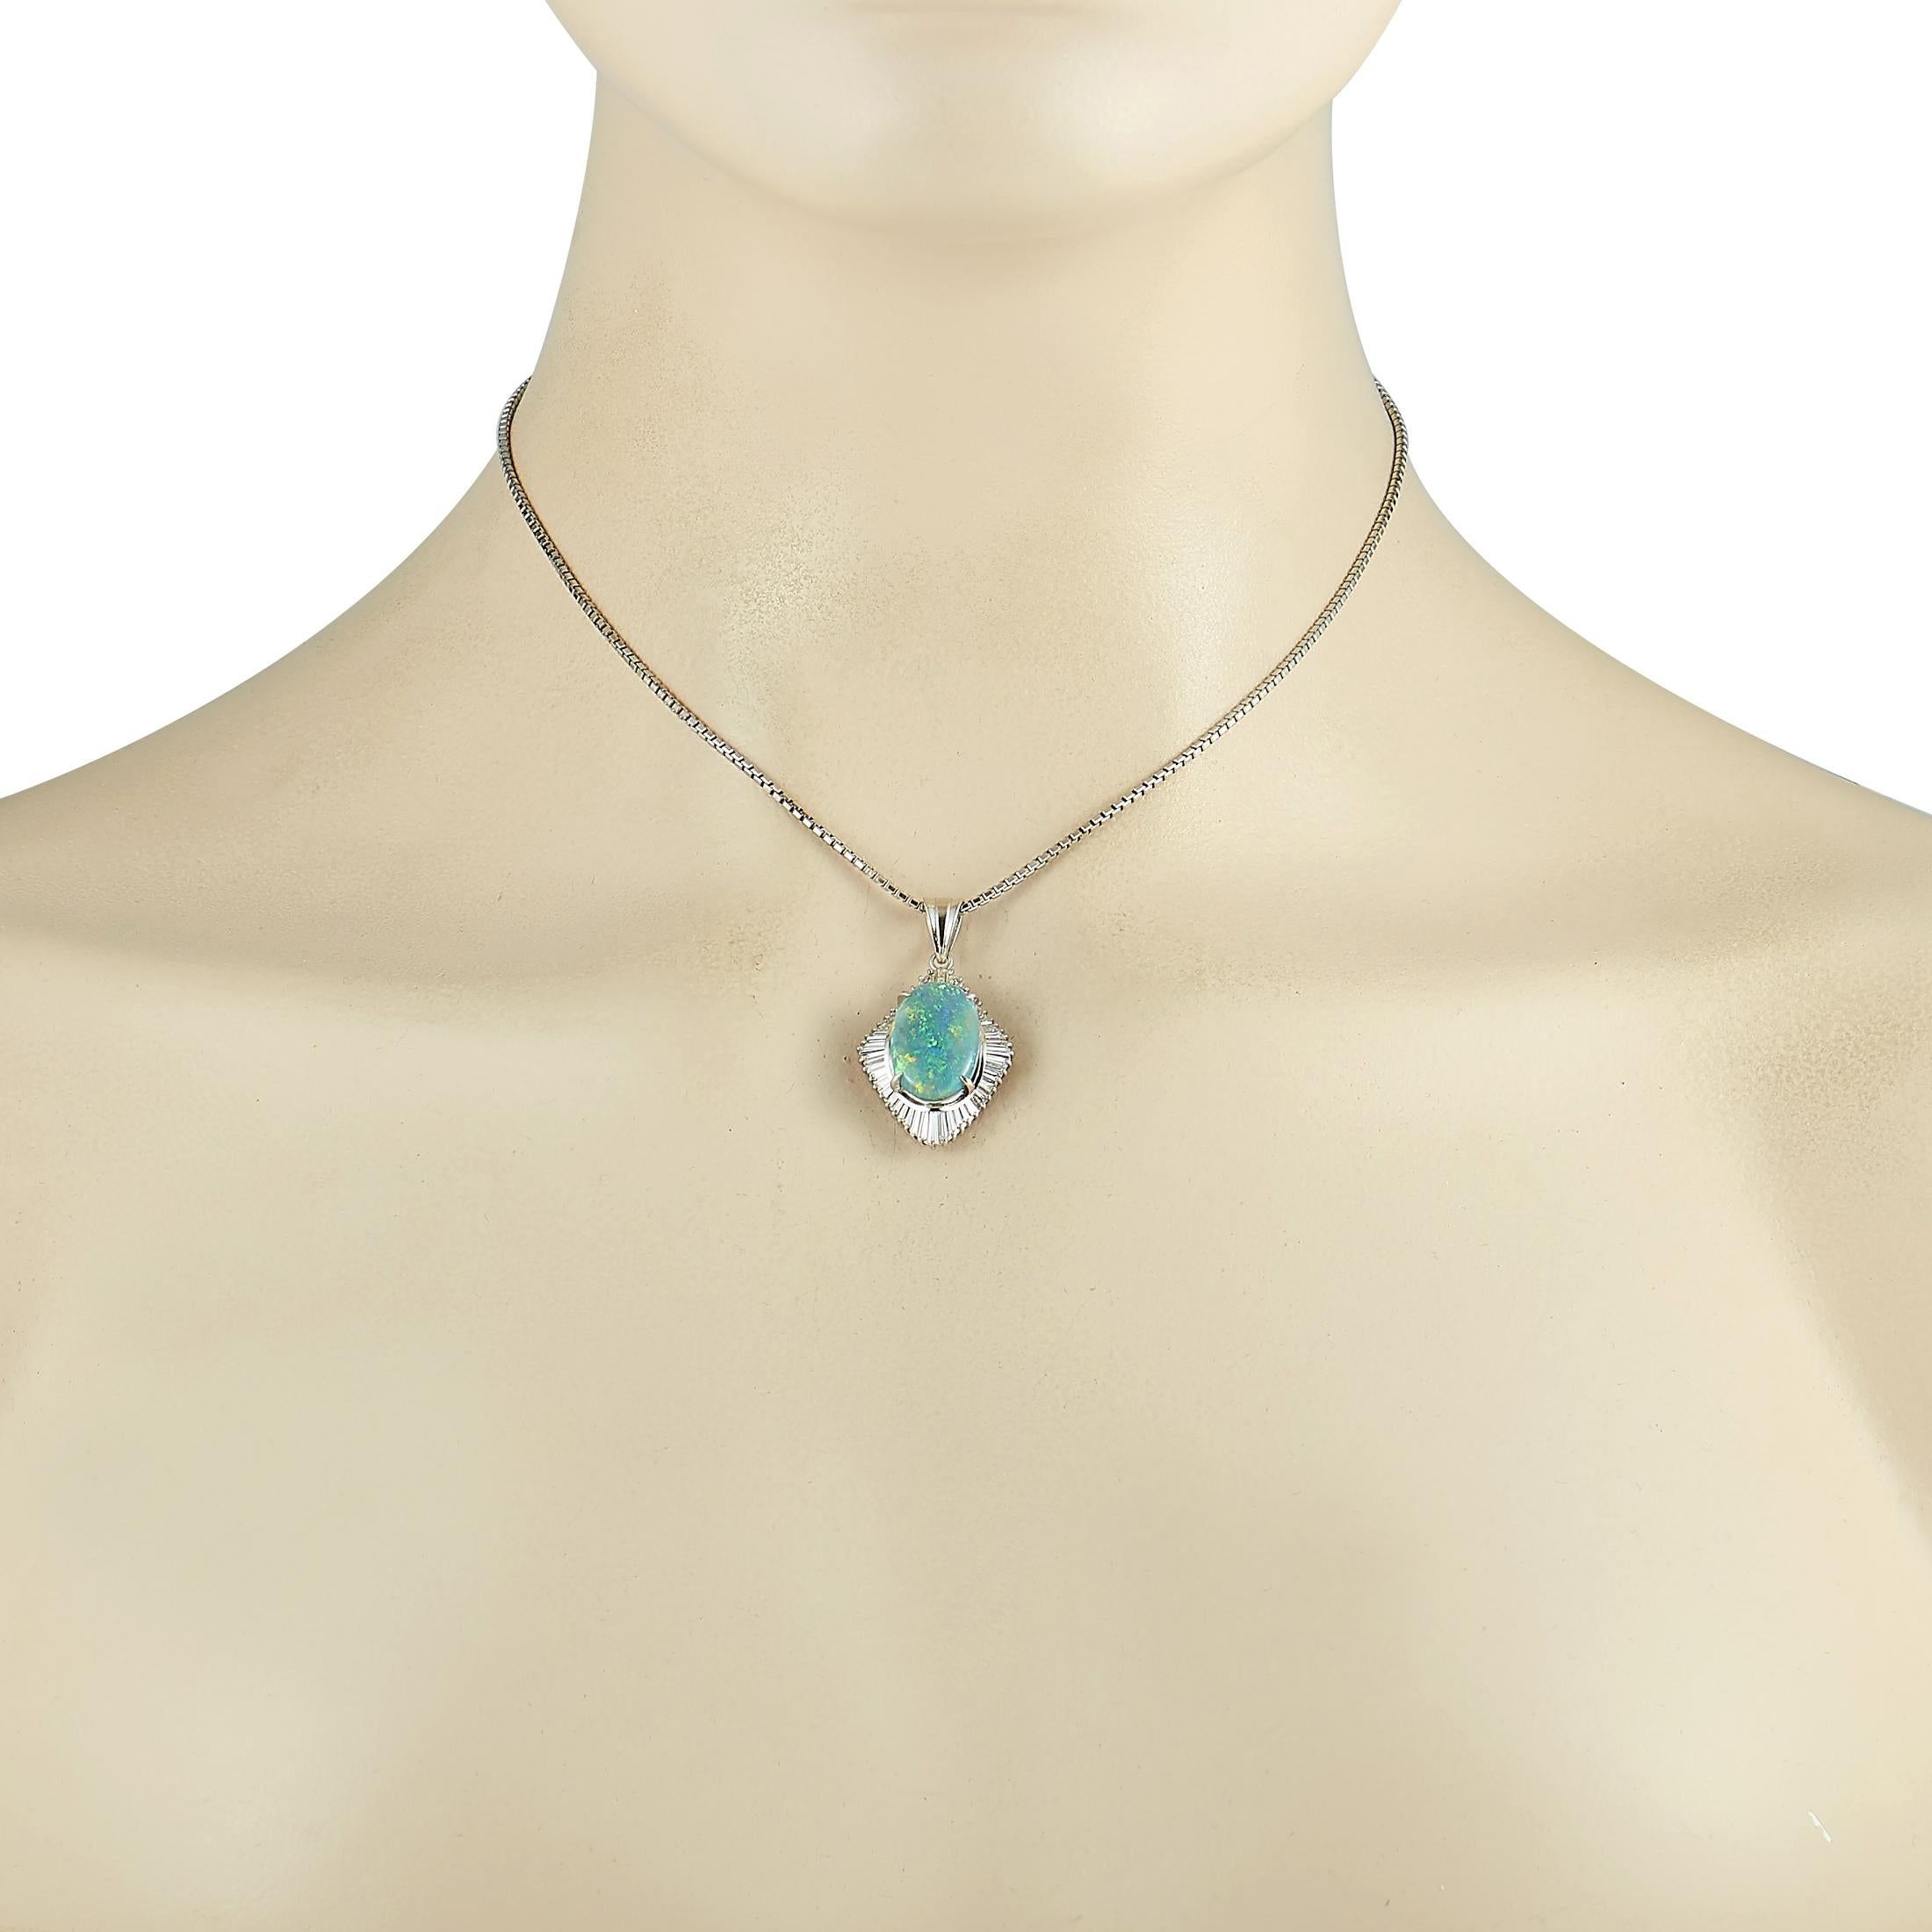 This LB Exclusive necklace is crafted from platinum and weighs 17.5 grams. It is presented with a 15” chain and a pendant that measures 1.37” in length and 0.75” in width. The necklace is embellished with a 5.10 ct black opal and a total of 1.36